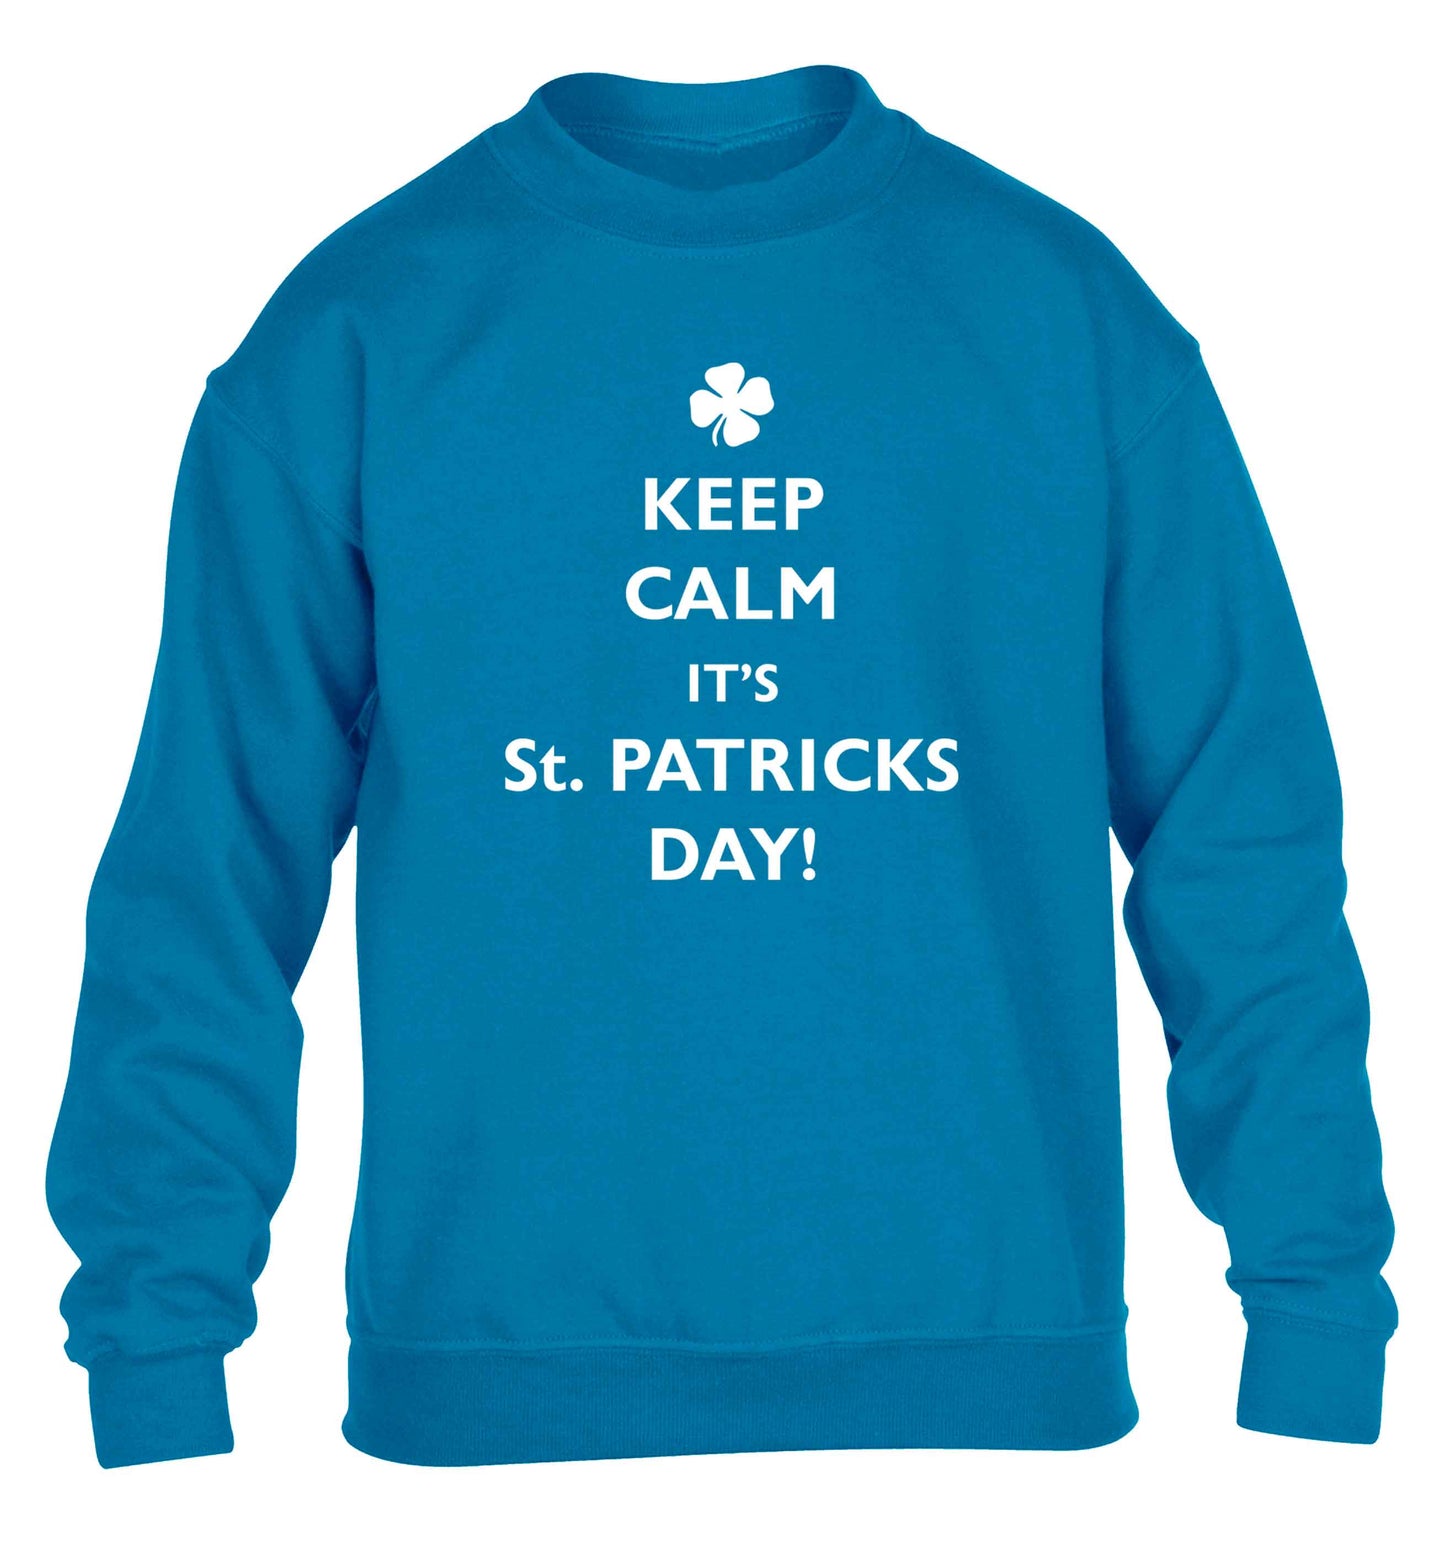 I can't keep calm it's St.Patricks day children's blue sweater 12-13 Years